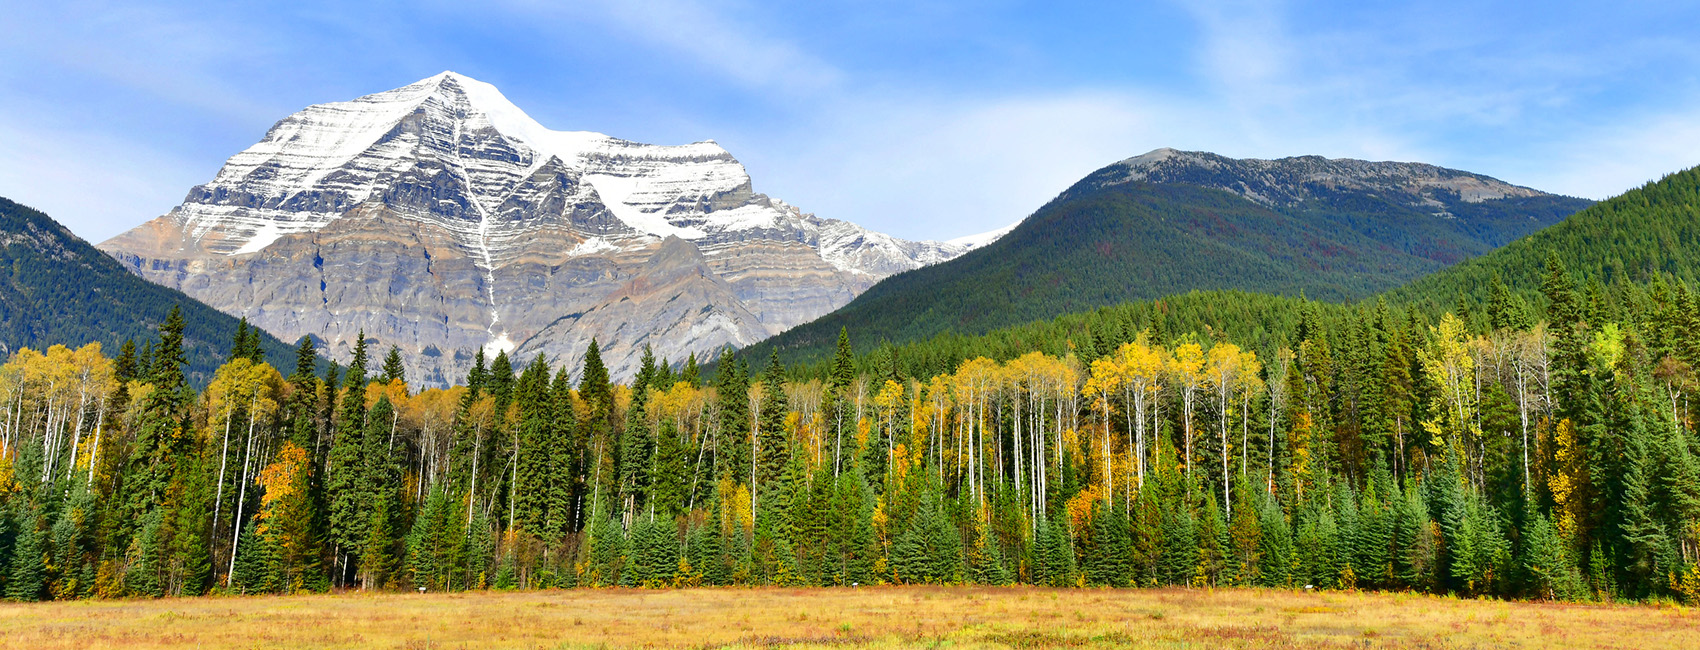 Panorama view of Mount Robson